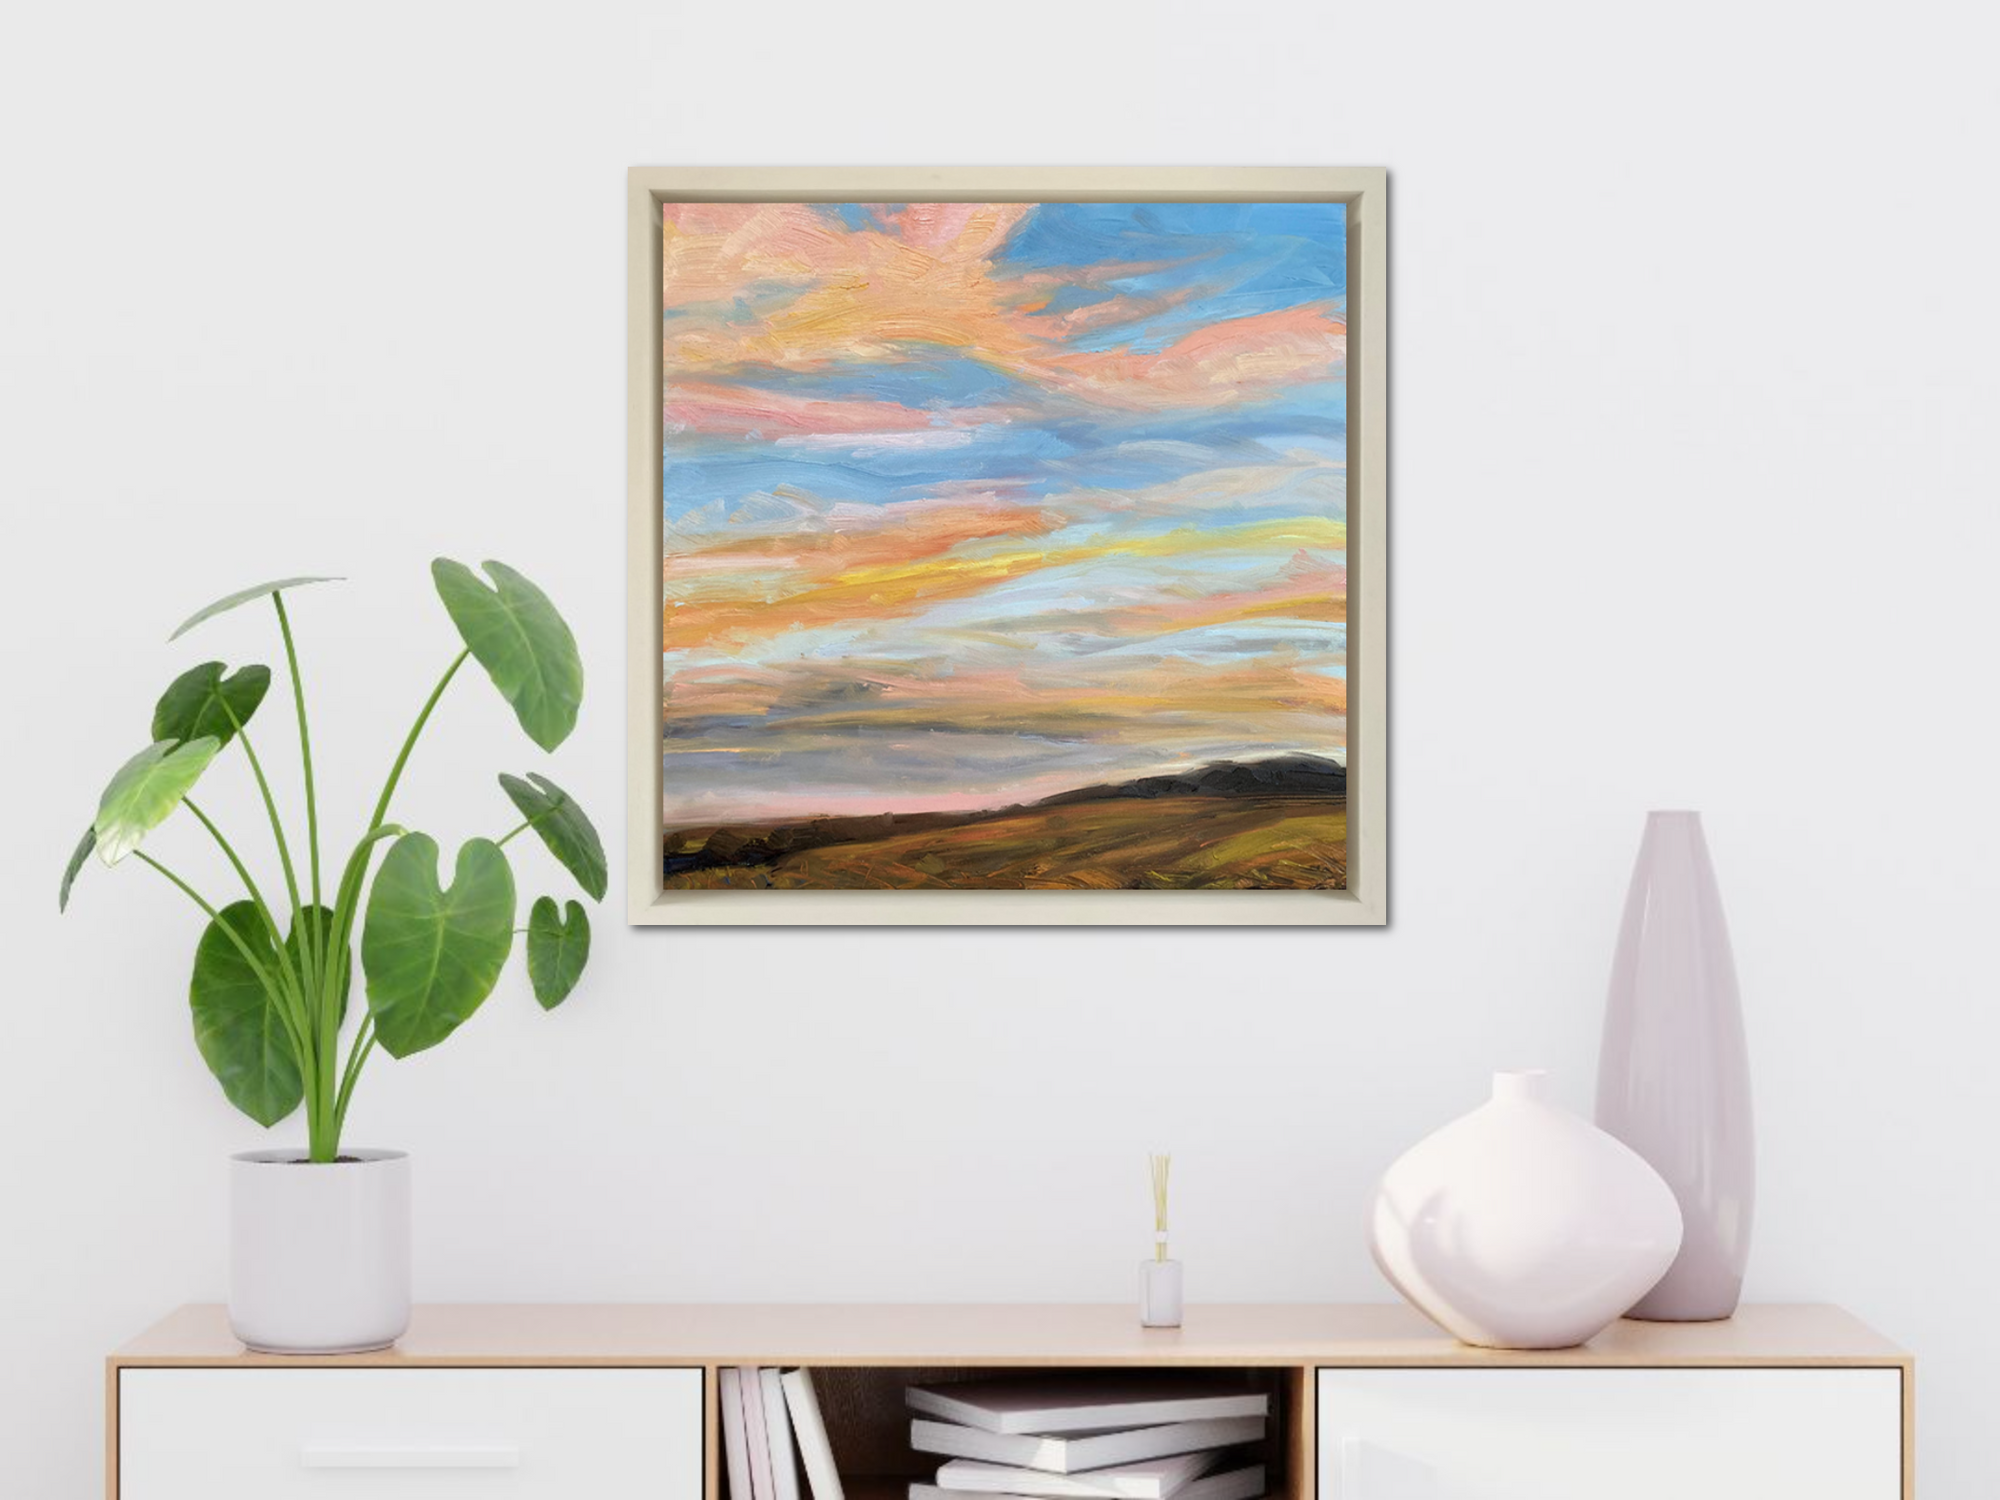 Neon Sky Original Oil Landscape Painting In Room Setting 3